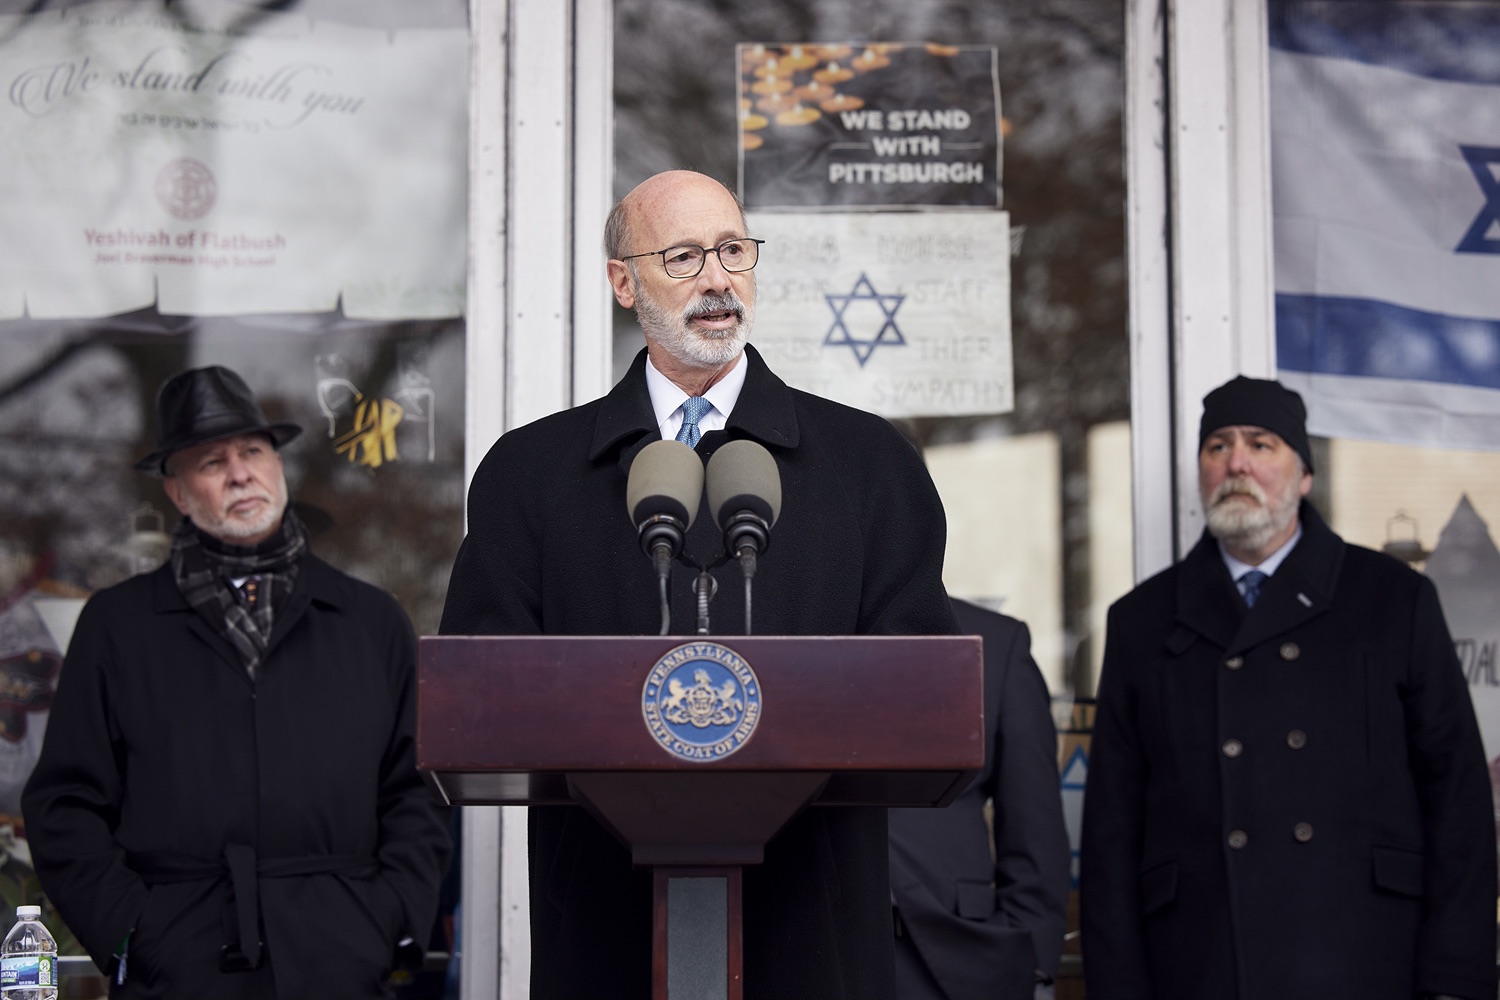 Pennsylvania Governor Tom Wolf speaking with the press.  Governor Tom Wolf visited the Tree of Life in Pittsburgh today to announce $6.6 million in state funding to support the rebuilding and reimagining of the synagogue. The governor was joined by Rabbi Jeffrey Myers, Senate Democratic Leader Jay Costa and members of the Tree of Lifes REMEMBER. REBUILD. RENEW campaign which will transform the site of the worst antisemitic attack in U.S. history into a new place of hope, remembrance, and education. Pittsburgh, PA - December 6, 2021<br><a href="https://filesource.amperwave.net/commonwealthofpa/photo/20308_gov_treeOfLife_dz_002_copy.jpg" target="_blank">⇣ Download Photo</a>